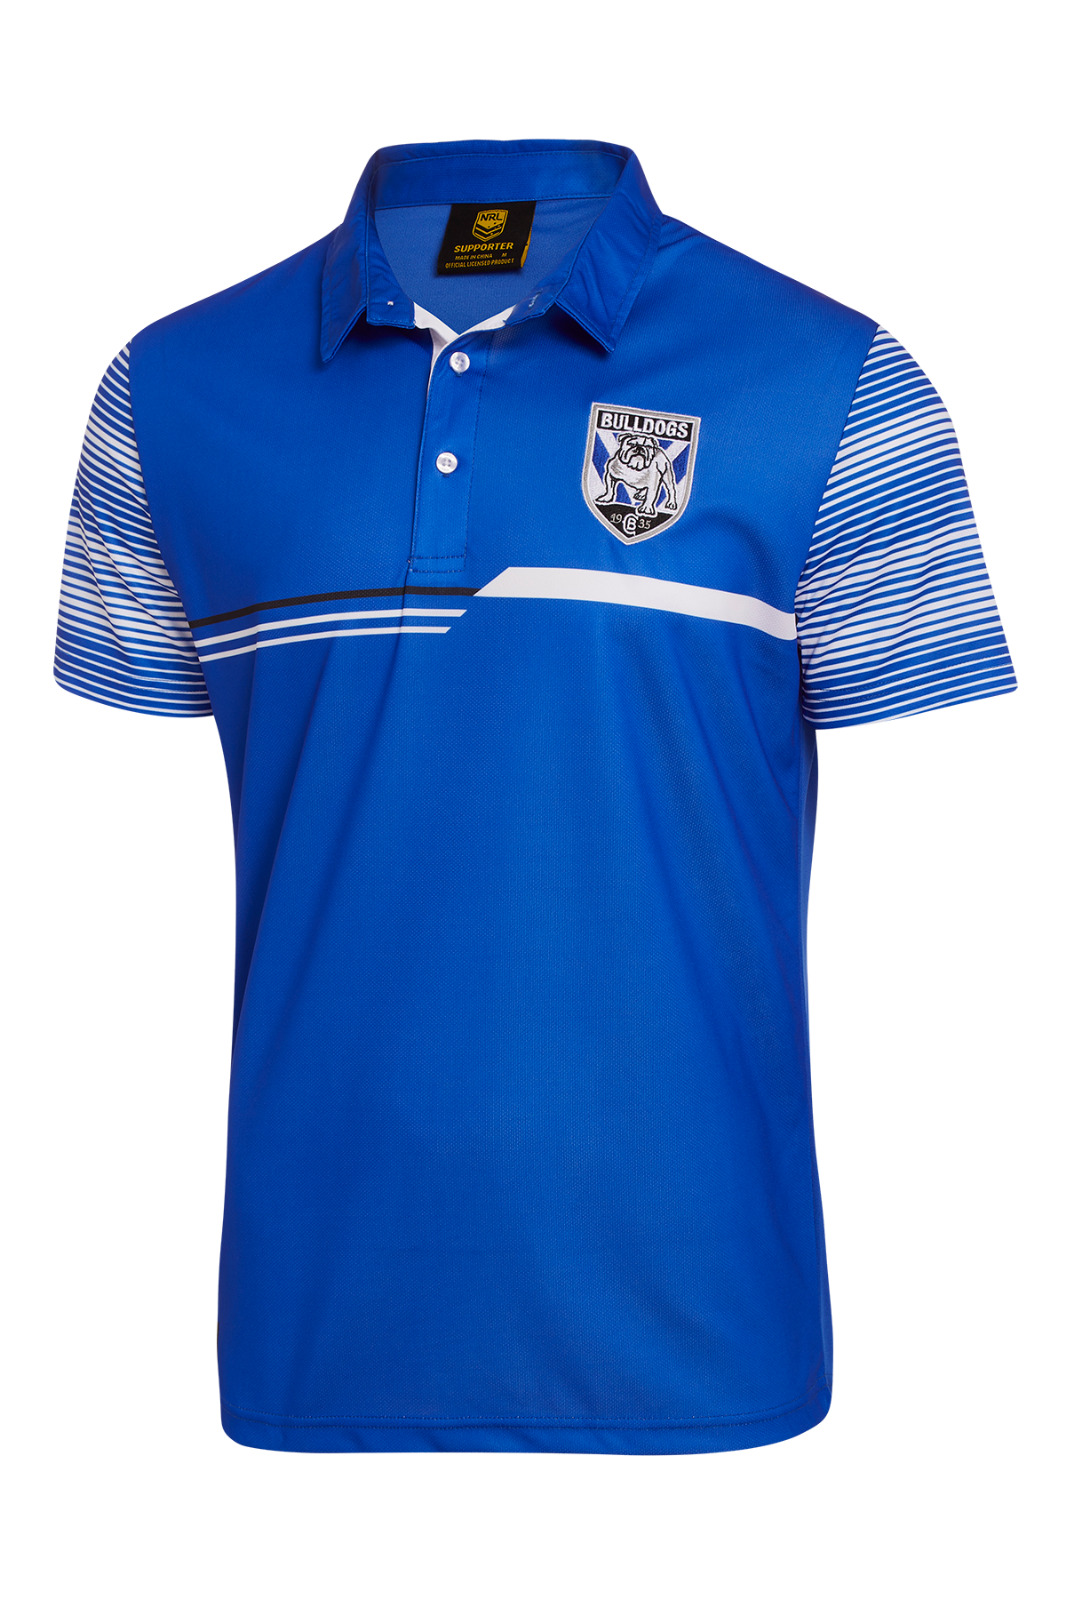 Details about   Canterbury Bankstown Bulldogs NRL Sublimated Polo Shirt Size S-5XL S18 